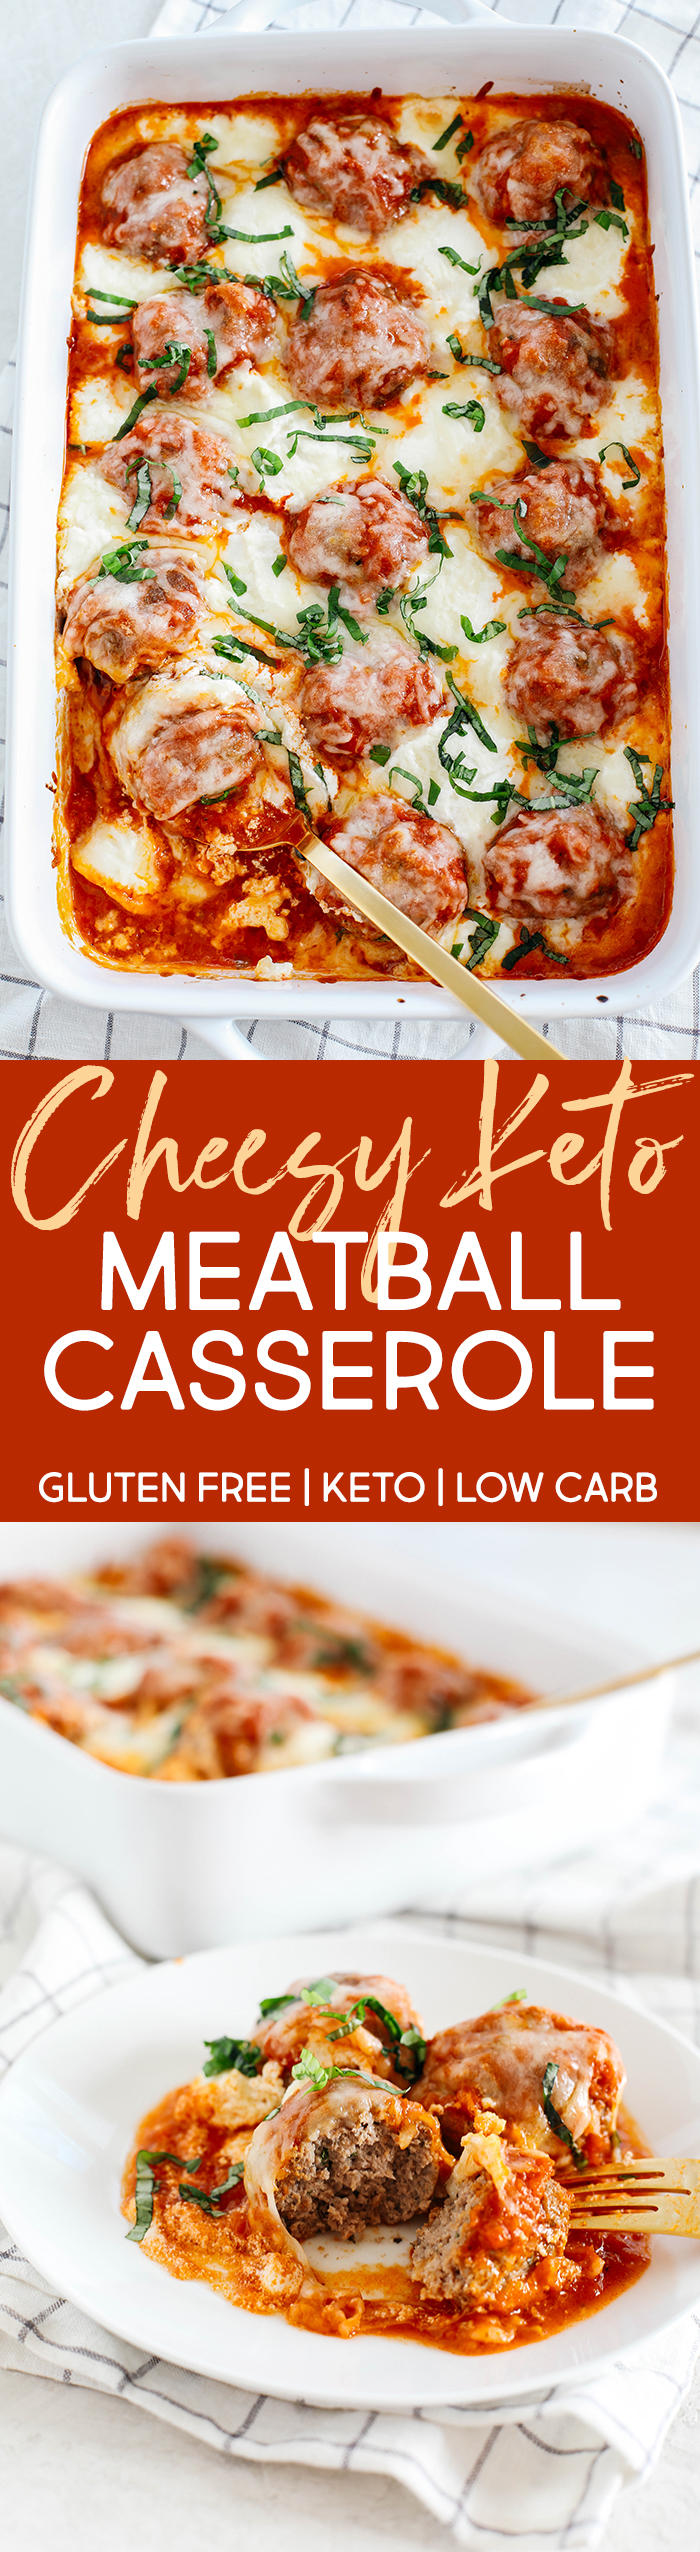 This Cheesy KETO Meatball Casserole is delicious and super filling with homemade meatballs topped with creamy ricotta cheese, mozzarella and parmesan for the perfect low carb meal your whole family will enjoy! #keto #lowcarb